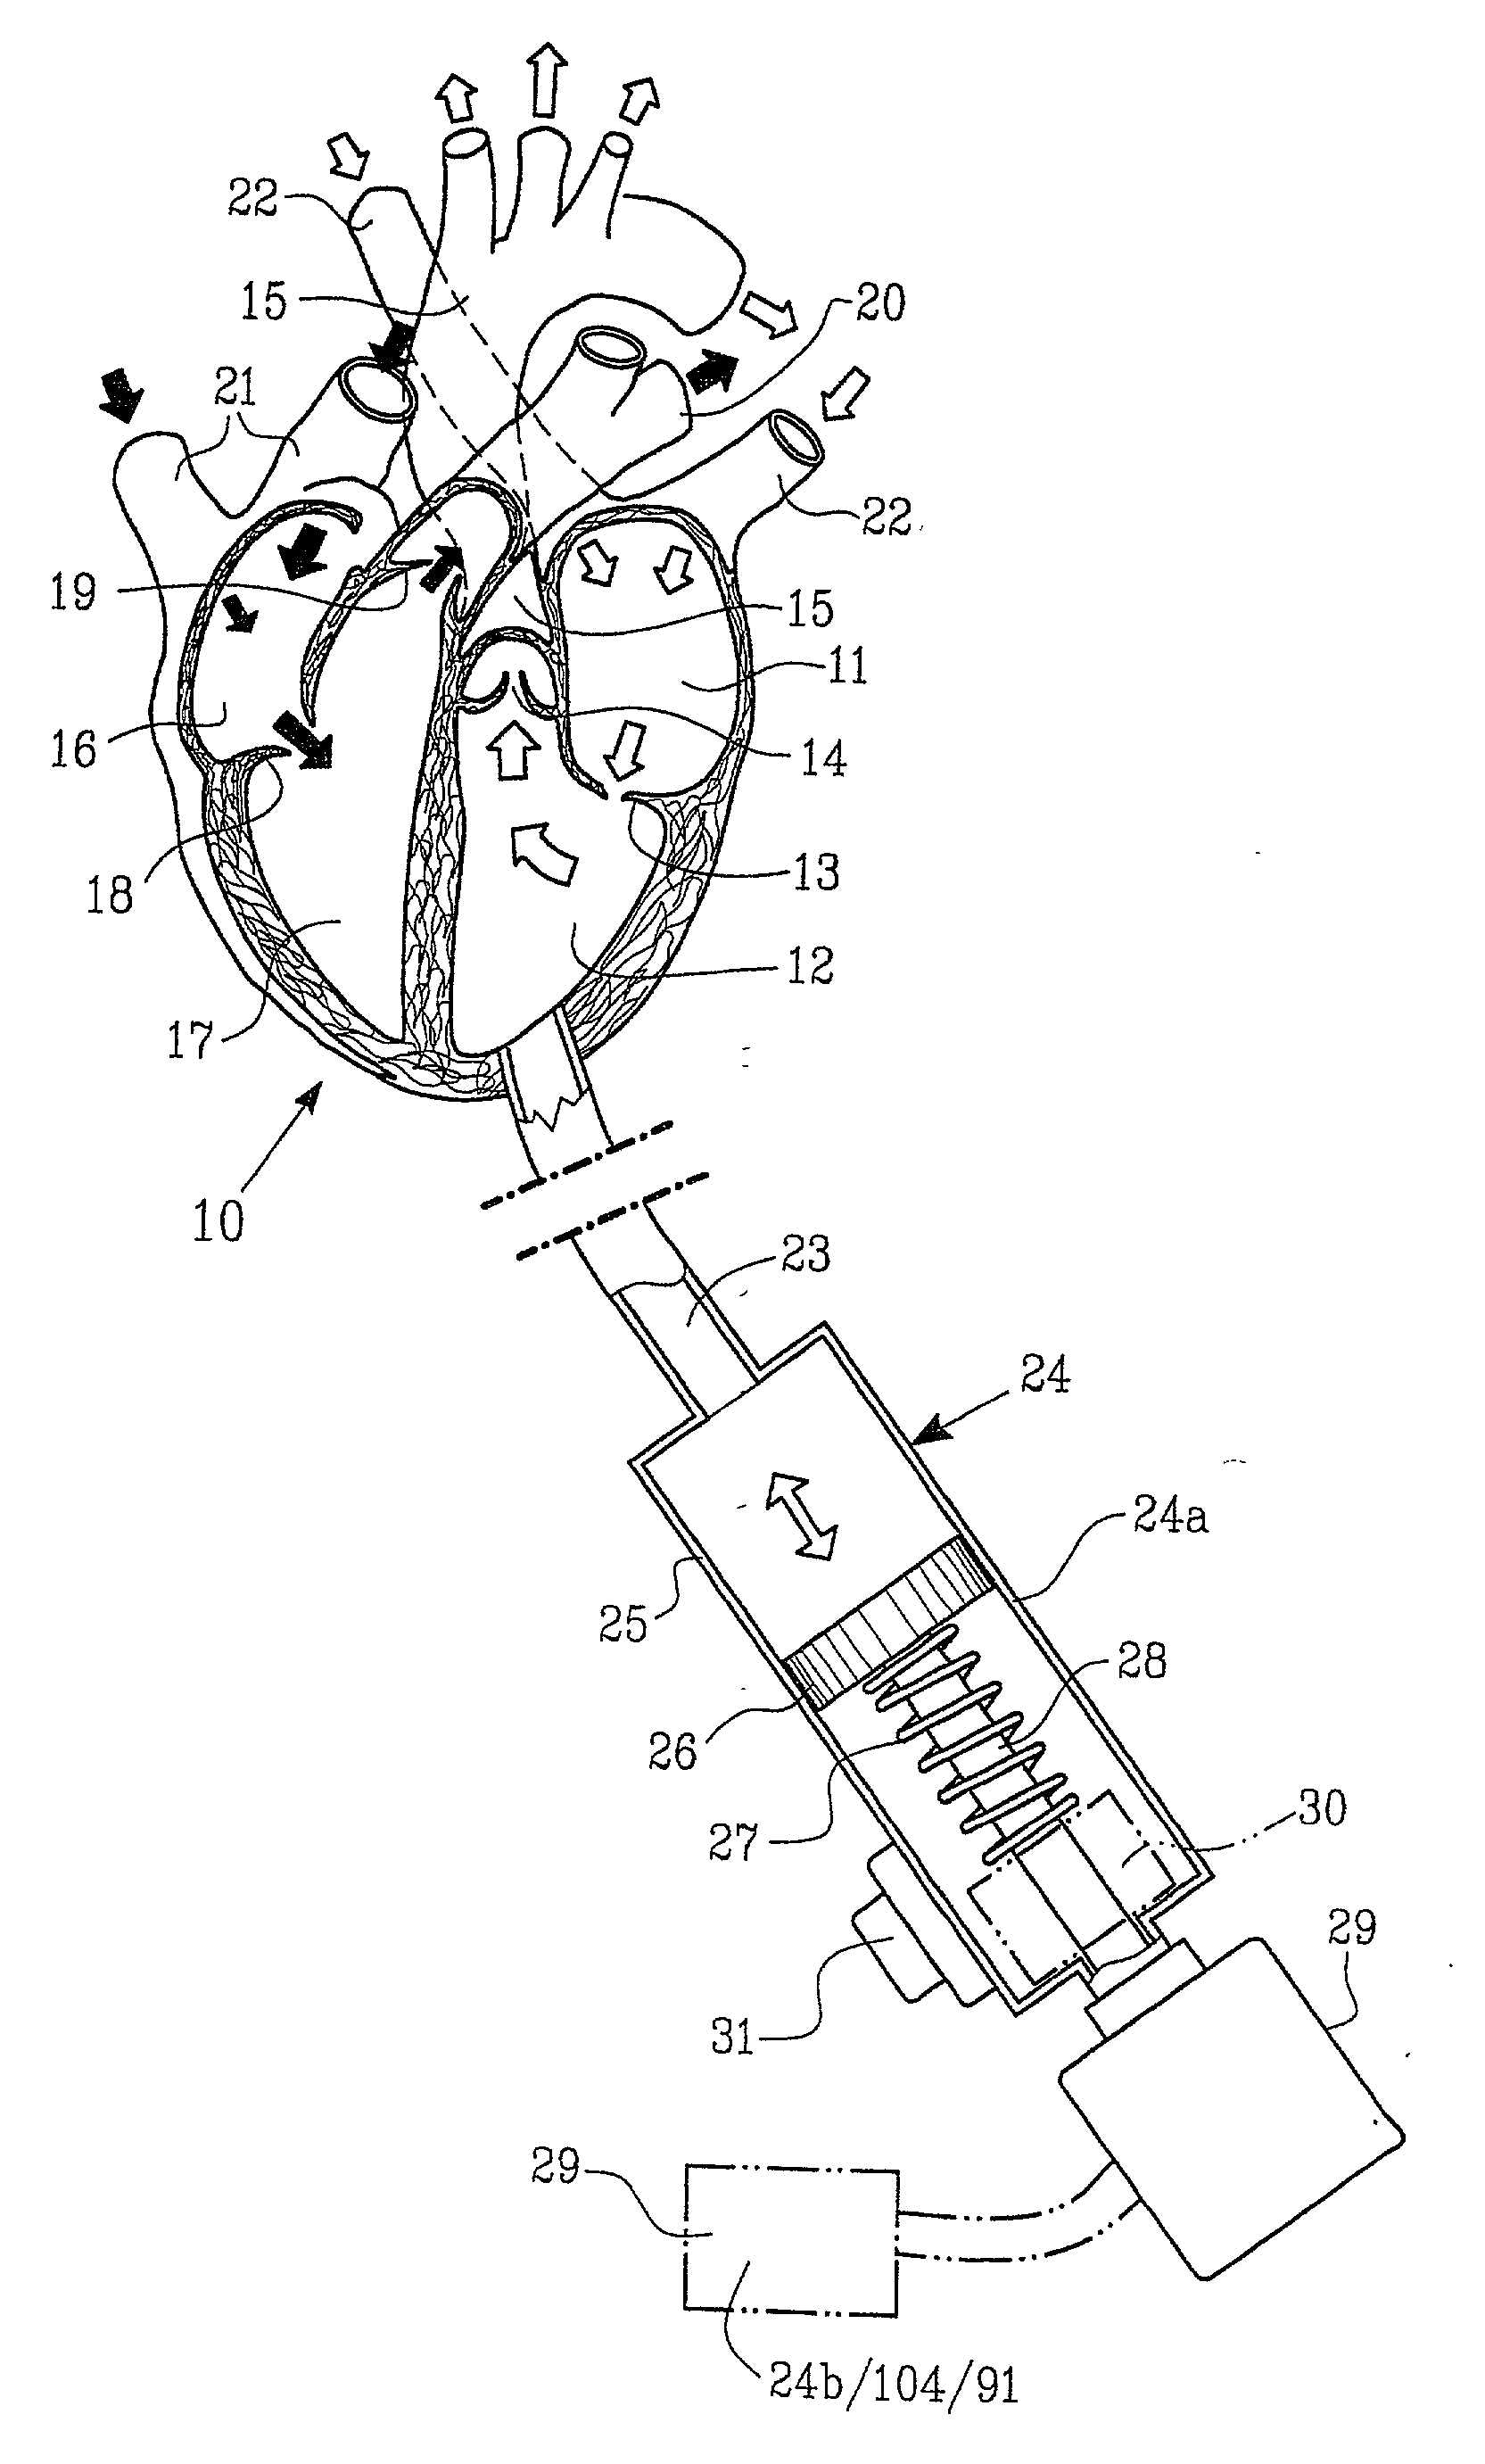 Implantable device for utilisation of the hydraulic energy of the heart